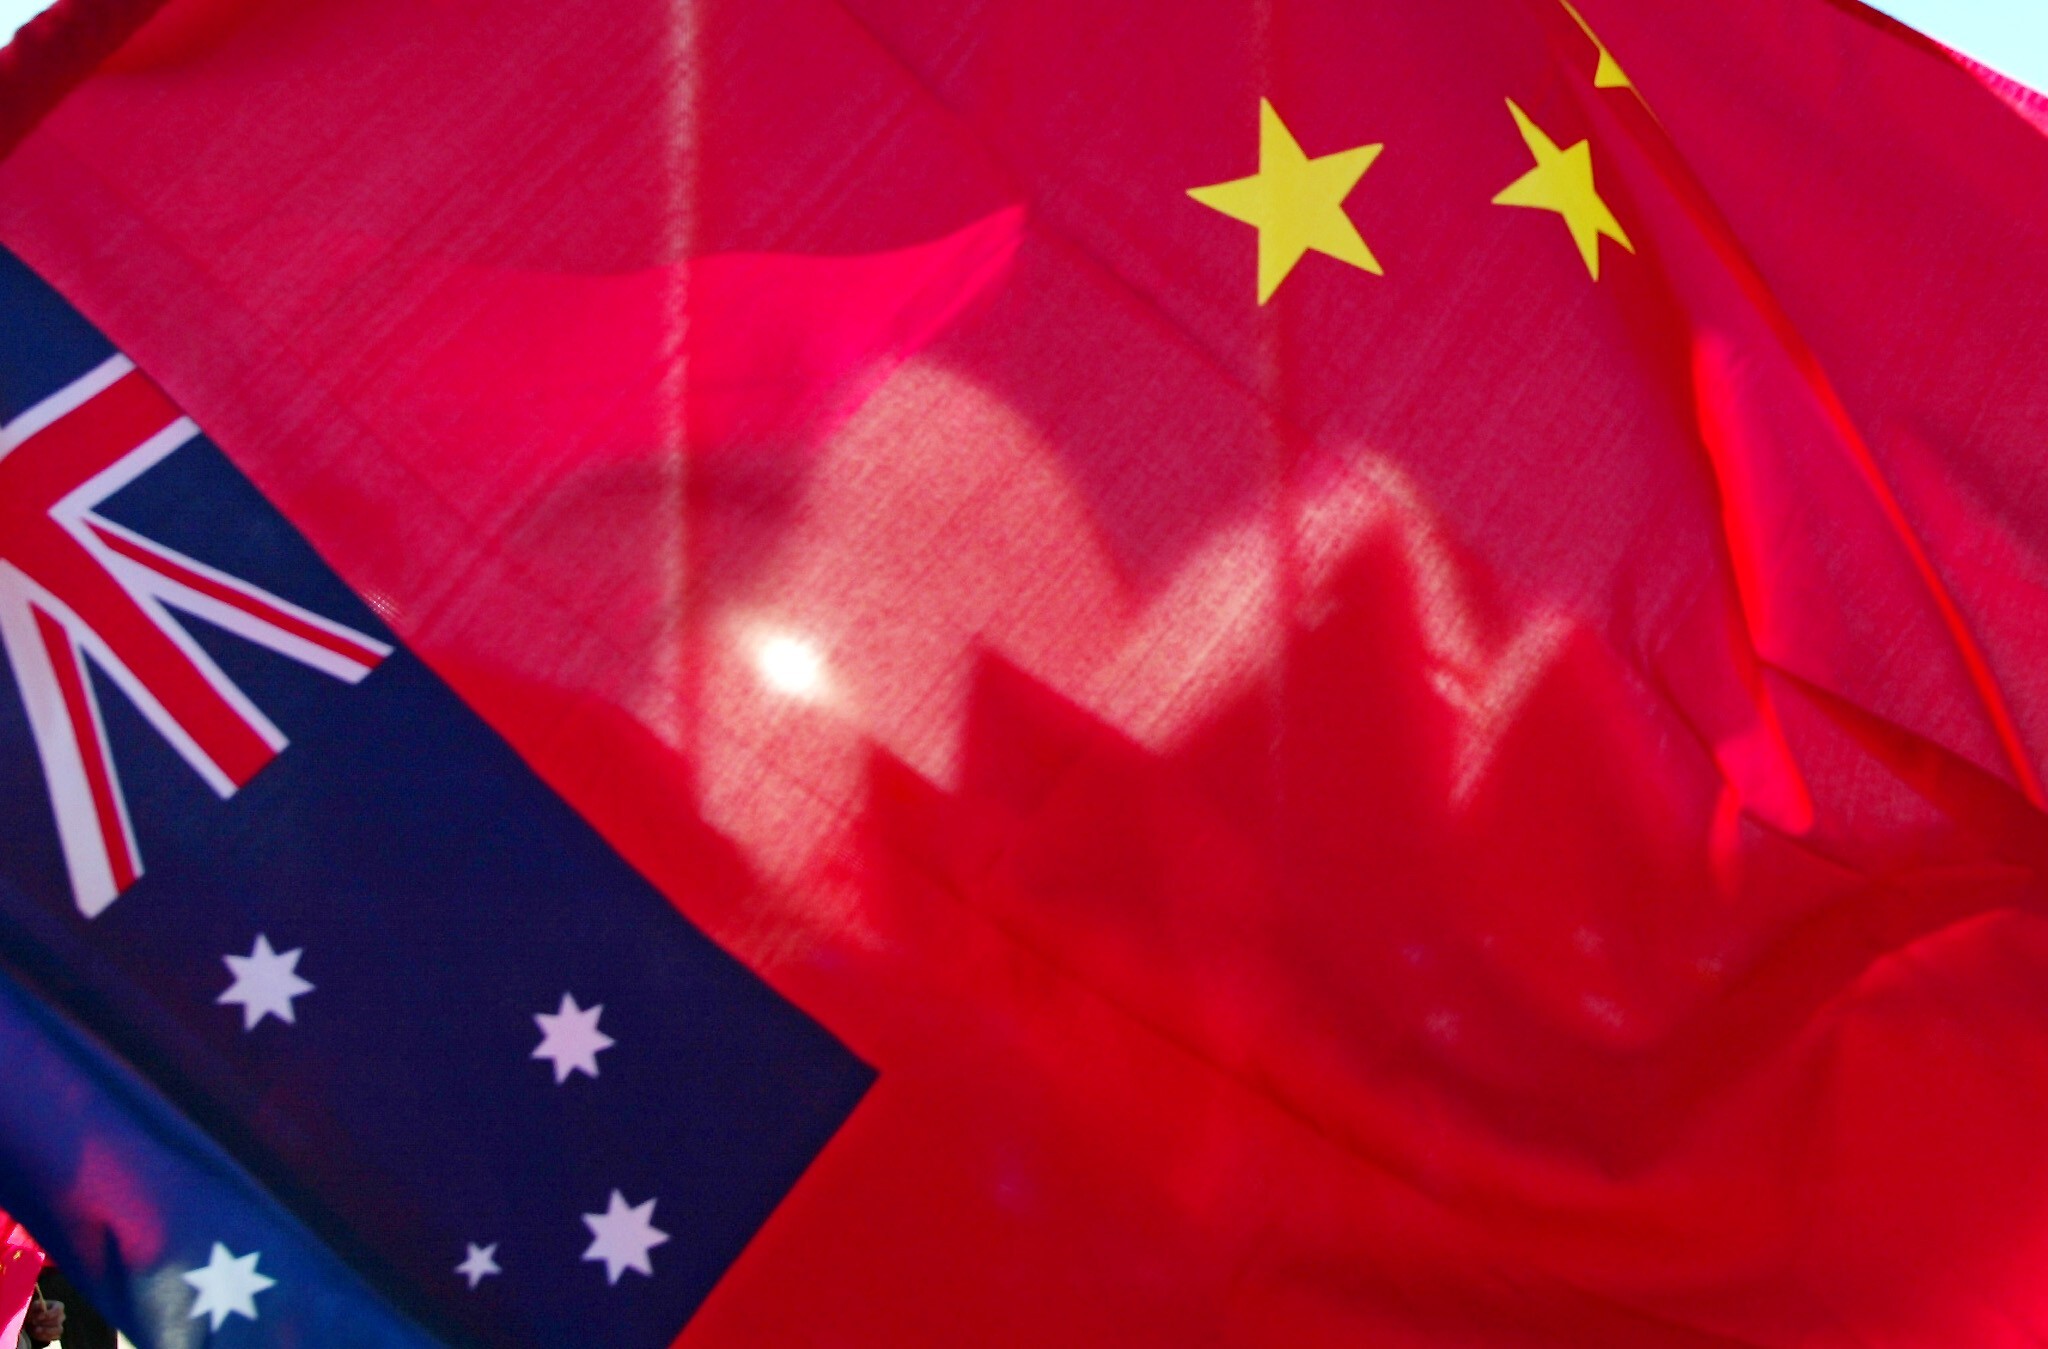 The Sydney Opera House is seen through a Chinese flag. Understandably, where some of China’s activities are not in line with Australian values, they attract criticism. But does that mean Australia should throw away its economic security? Photo: AFP